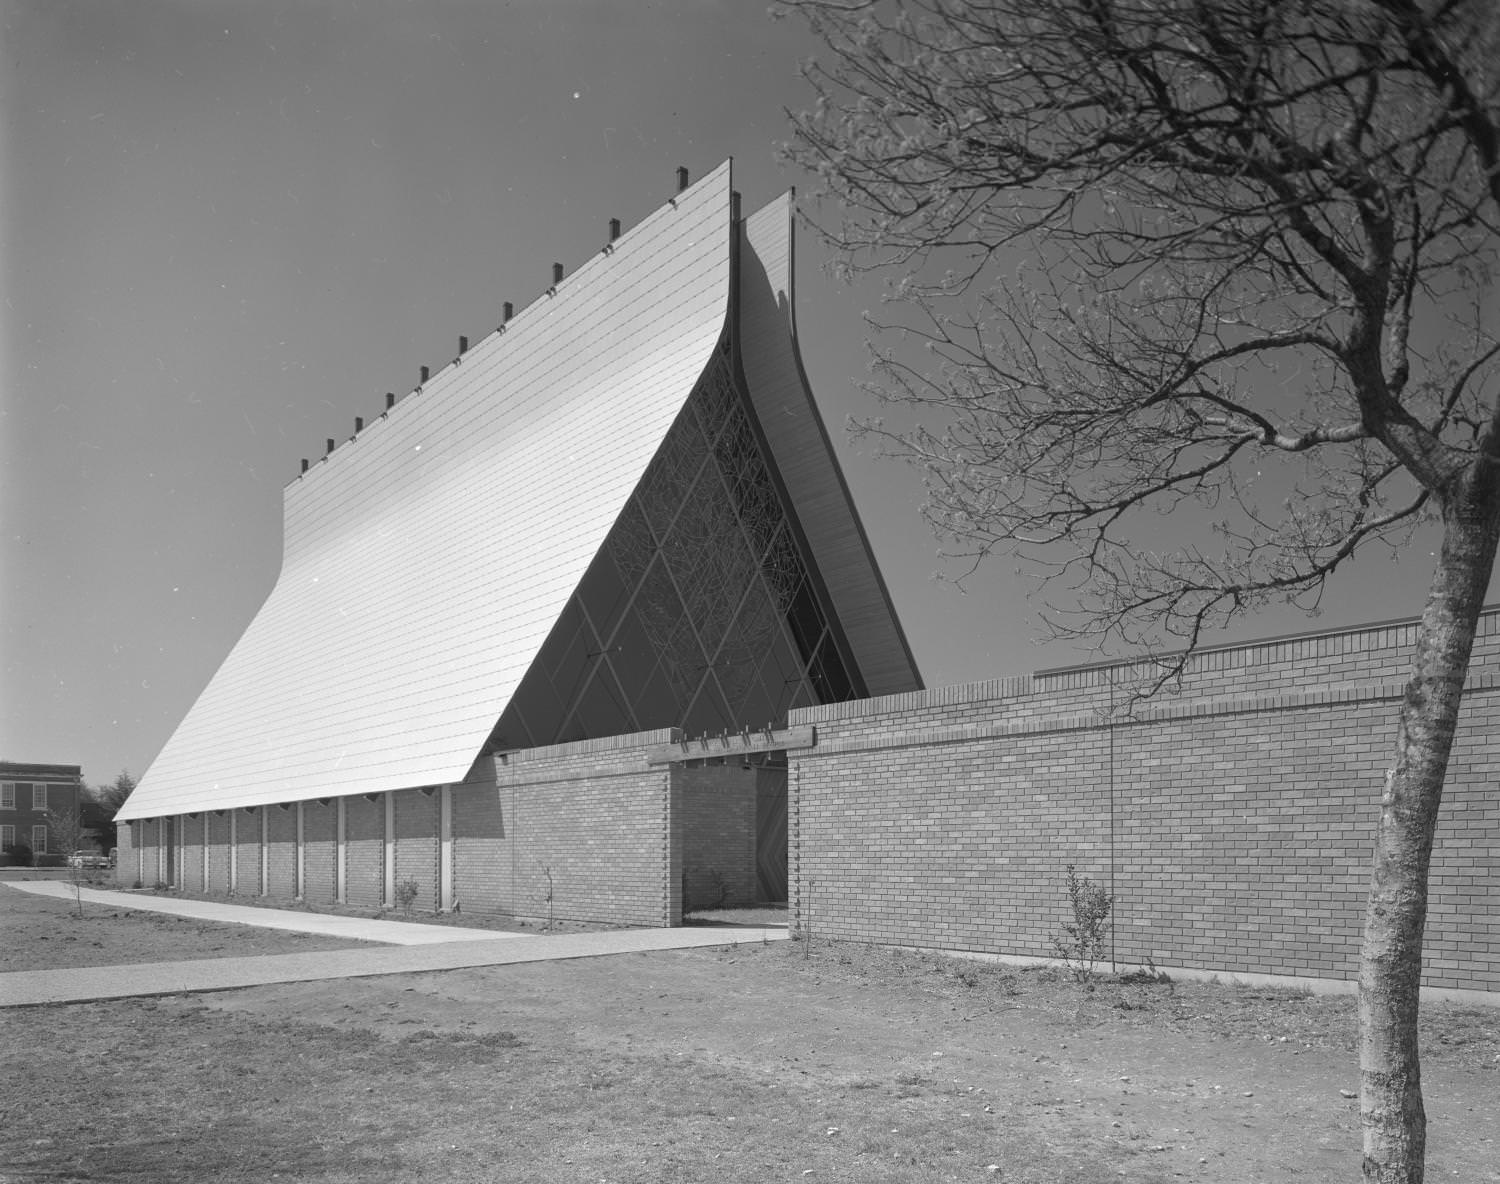 A steep roofed chapel located at the Austin State Supported Living Center, 1962